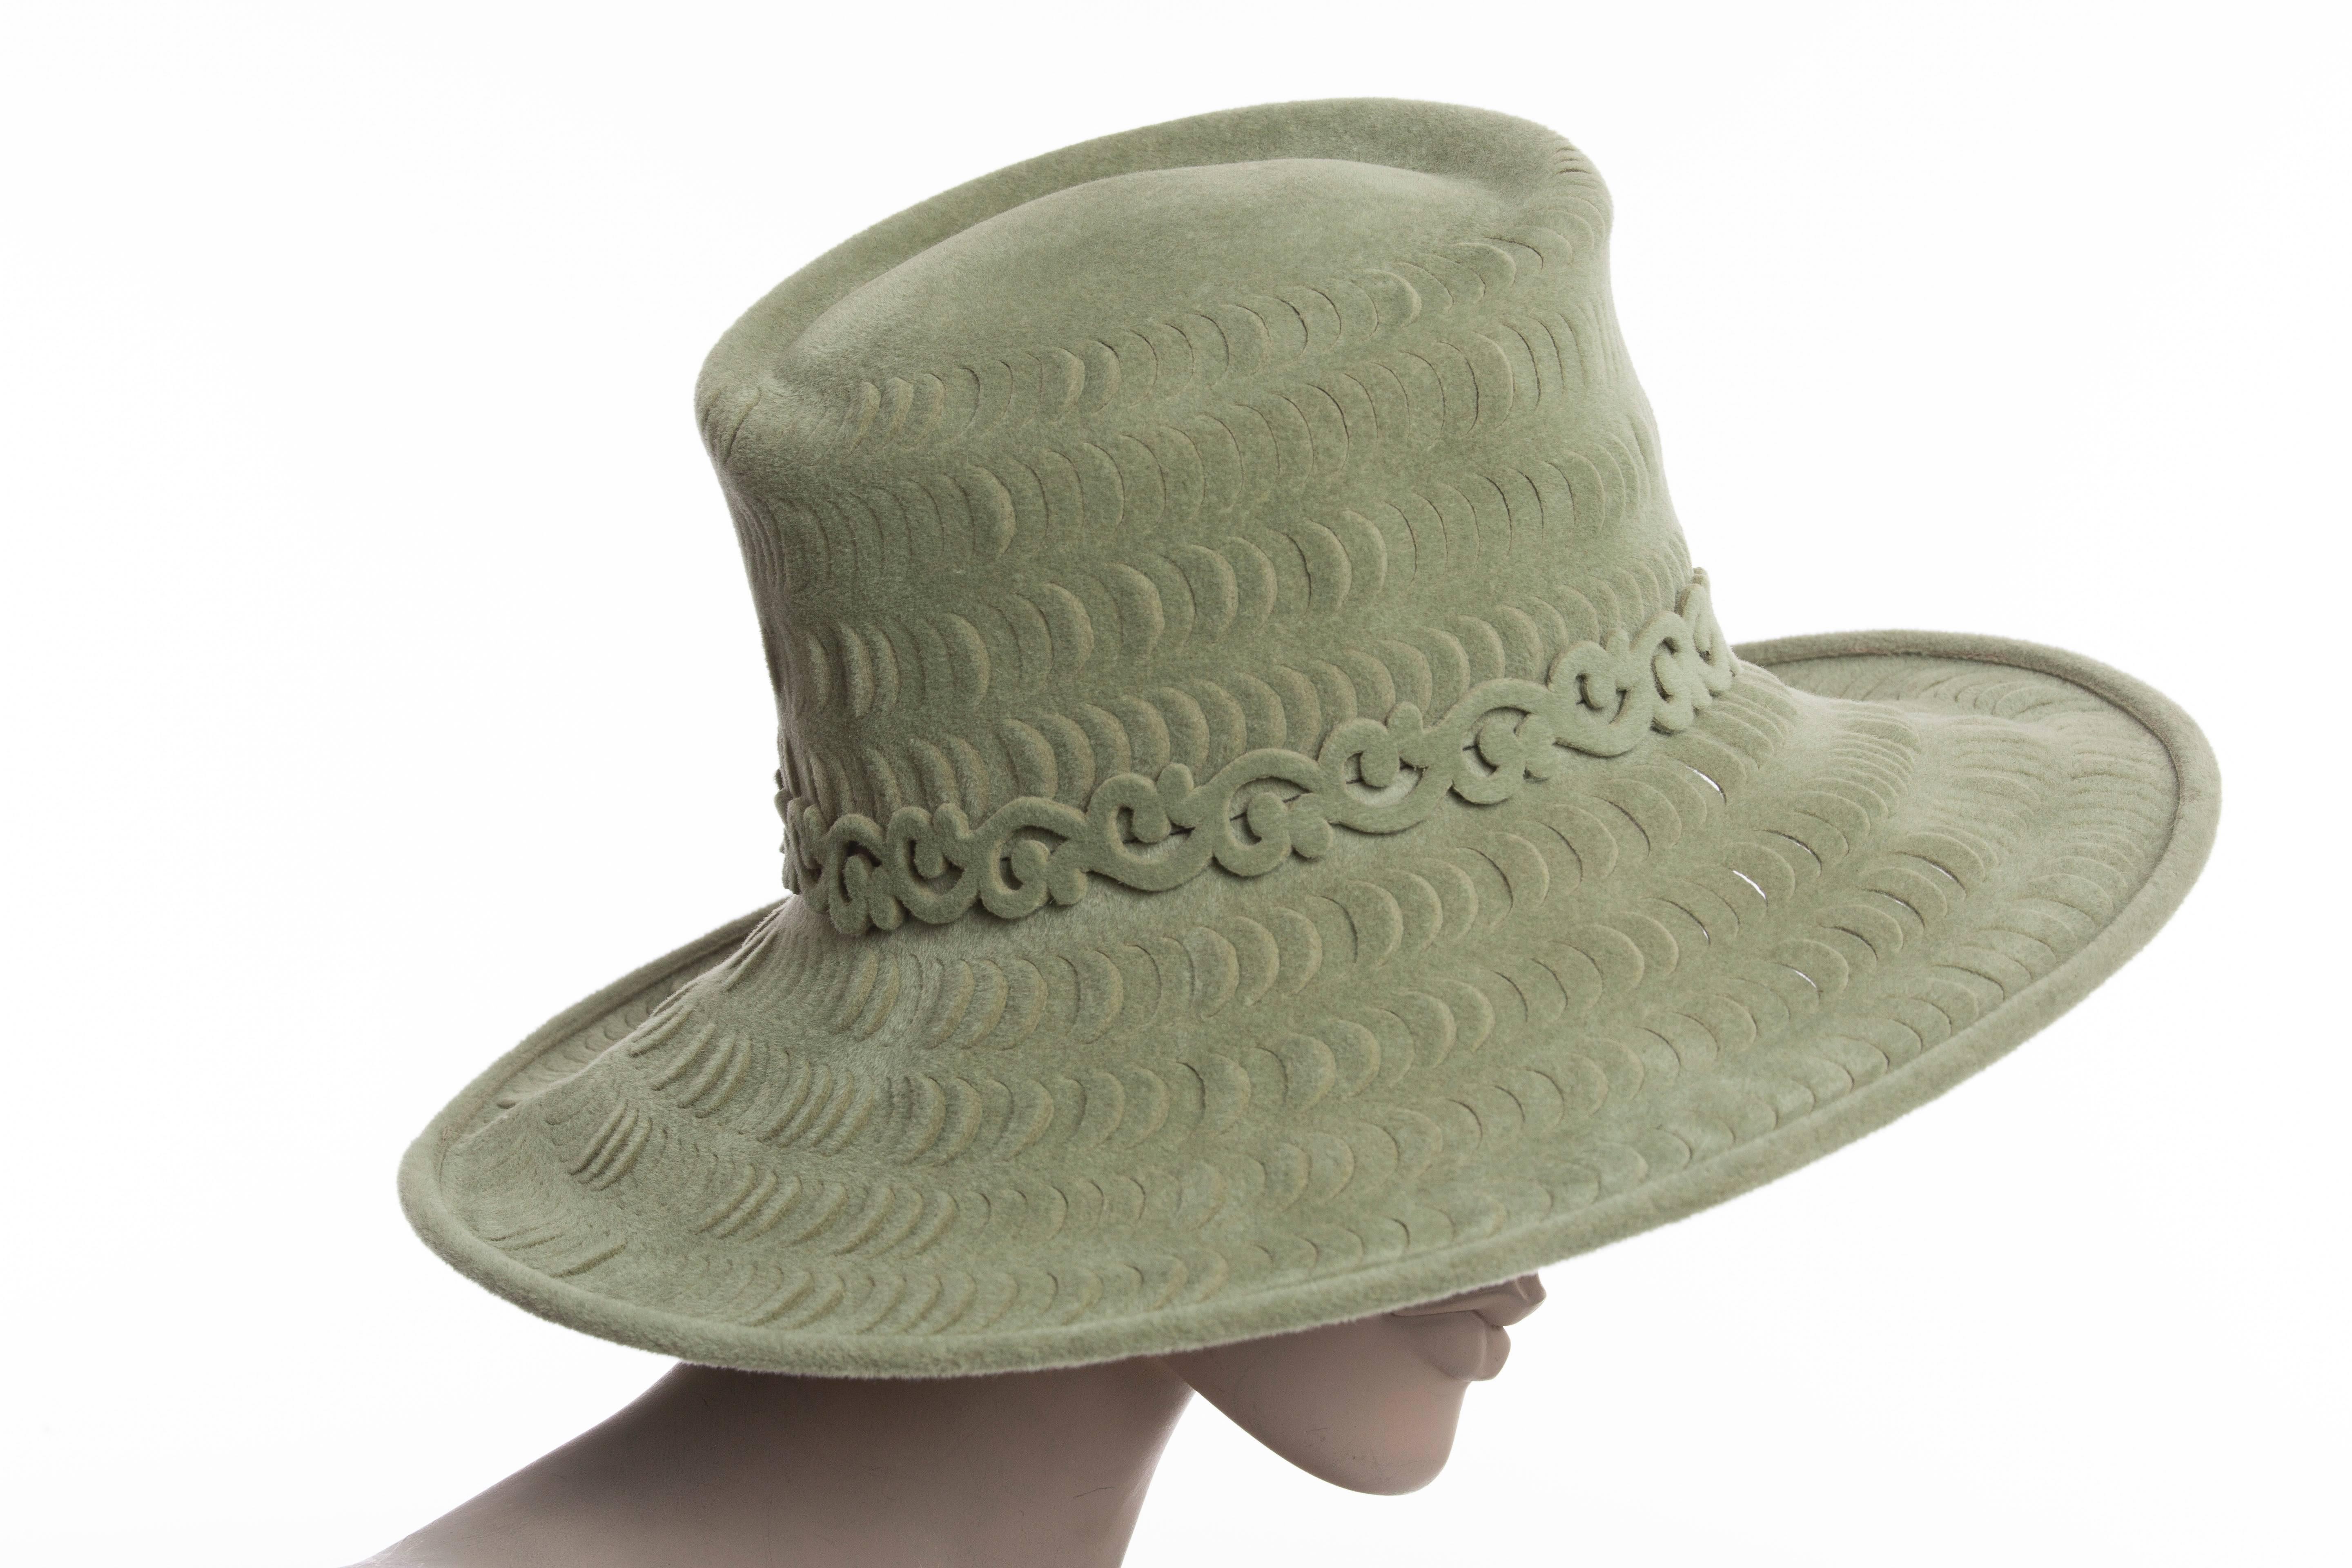  Philip Treacy sage green wool felt side-swept hat with scalloped details throughout and lasercut paisley trim. Includes hat box.

Circumference 25”, Brim 4.5”